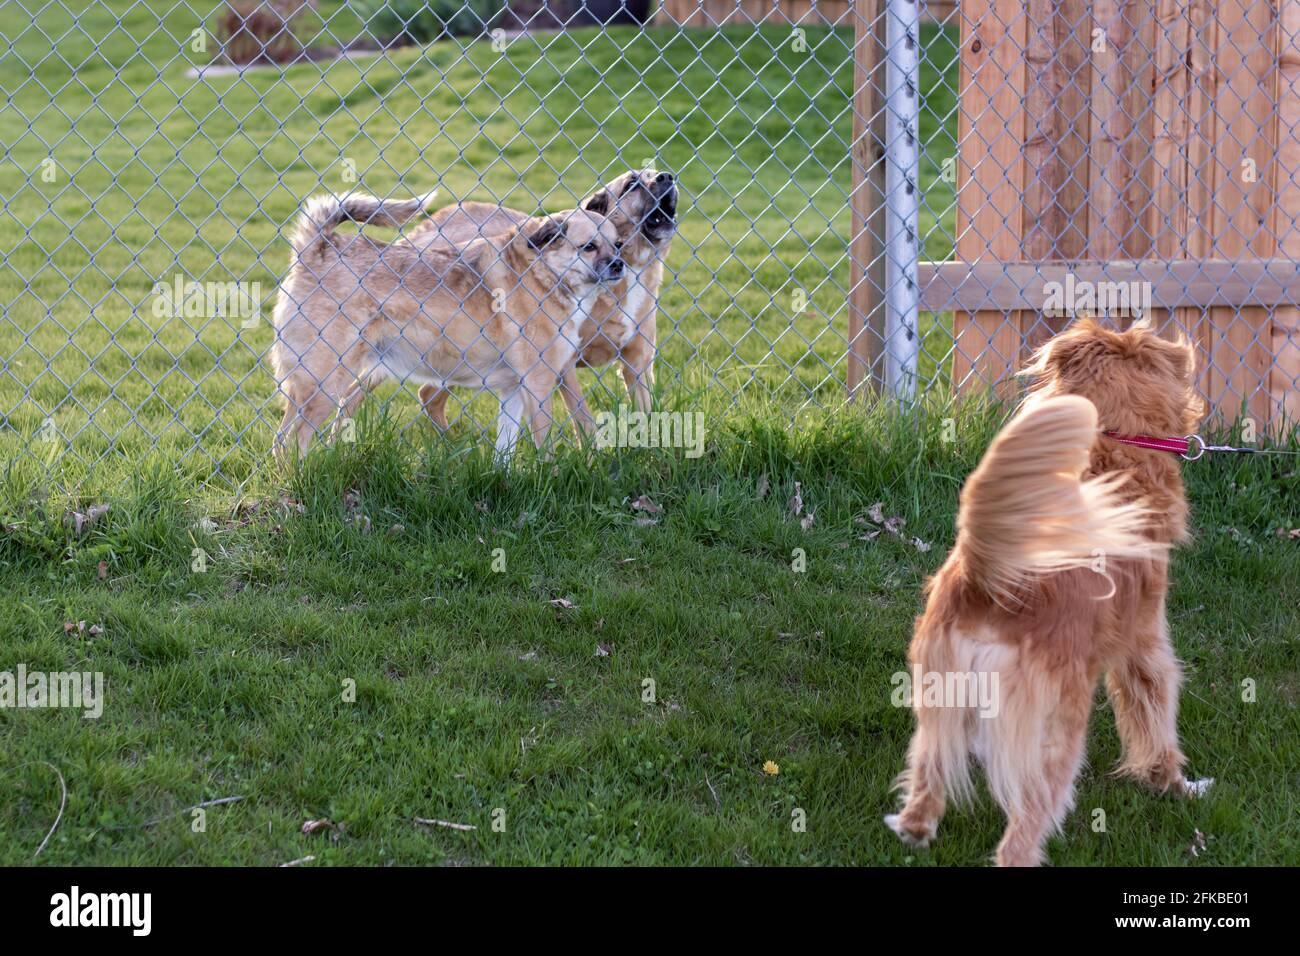 Two dogs behind a fence while another one is in front, on leash, being pulled away. One of the dogs behind the fence is barking and the other angry. Stock Photo